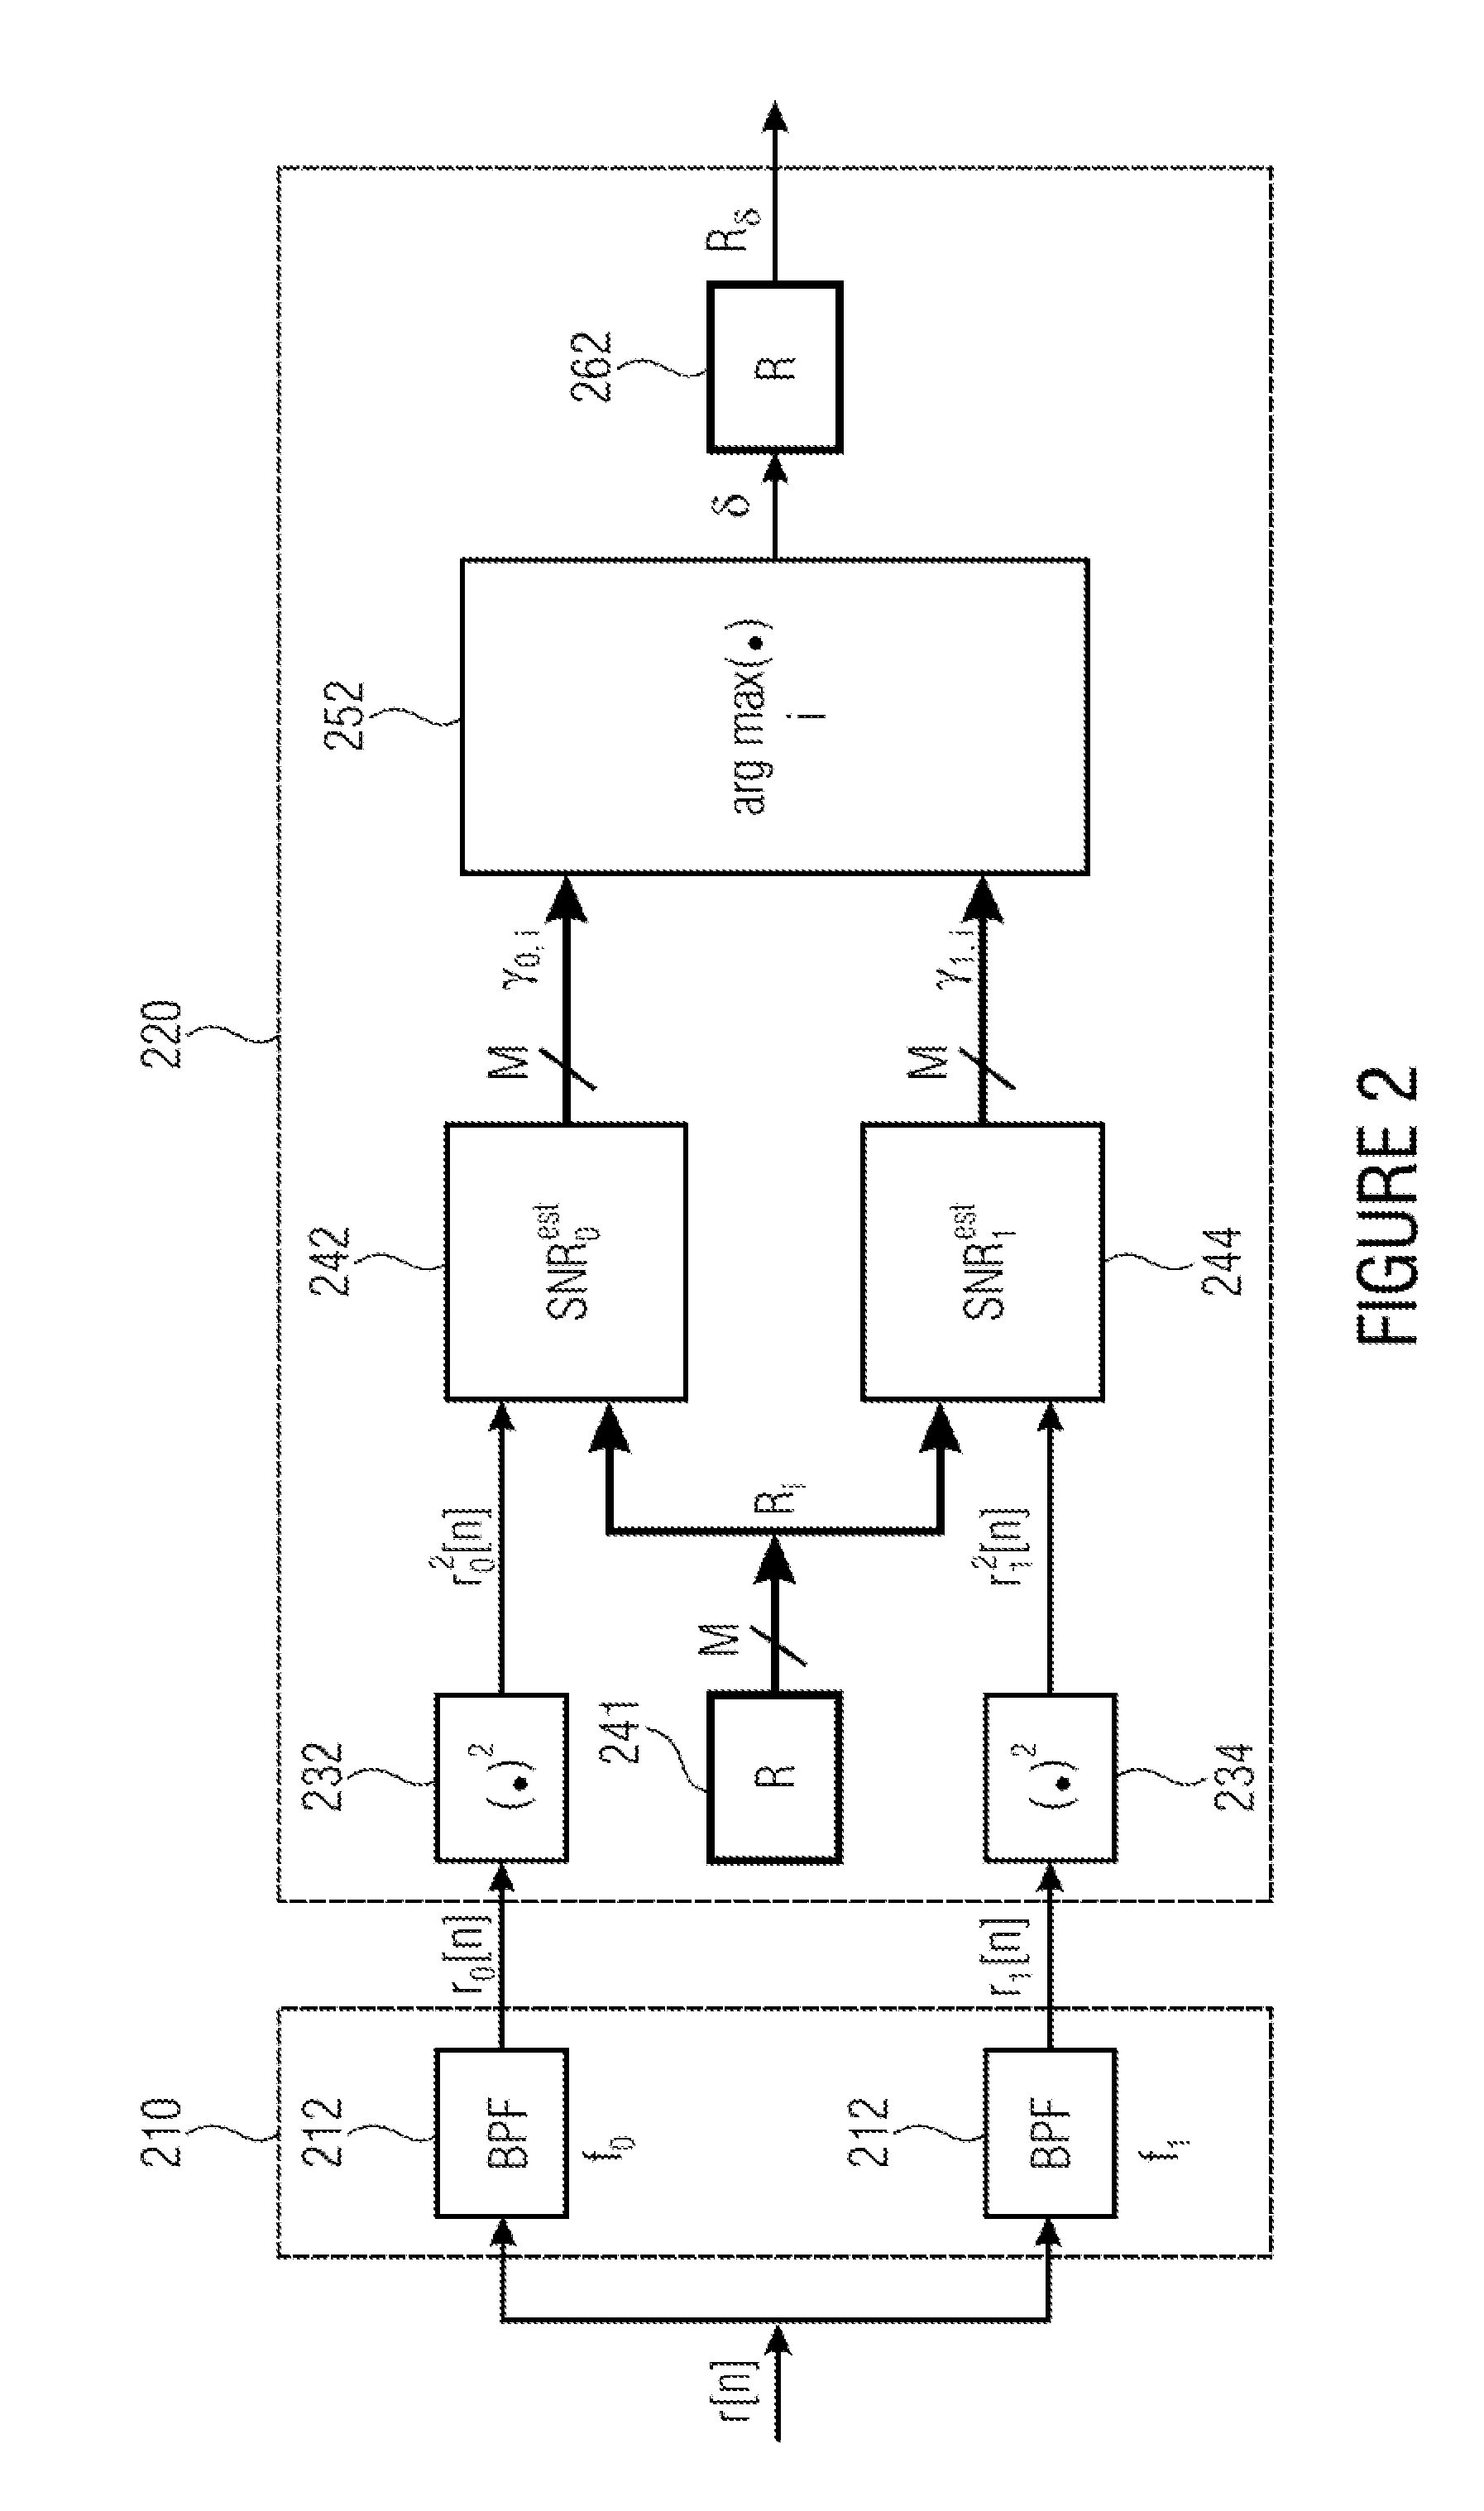 Device and method of sequence detection for frequency-shift keying